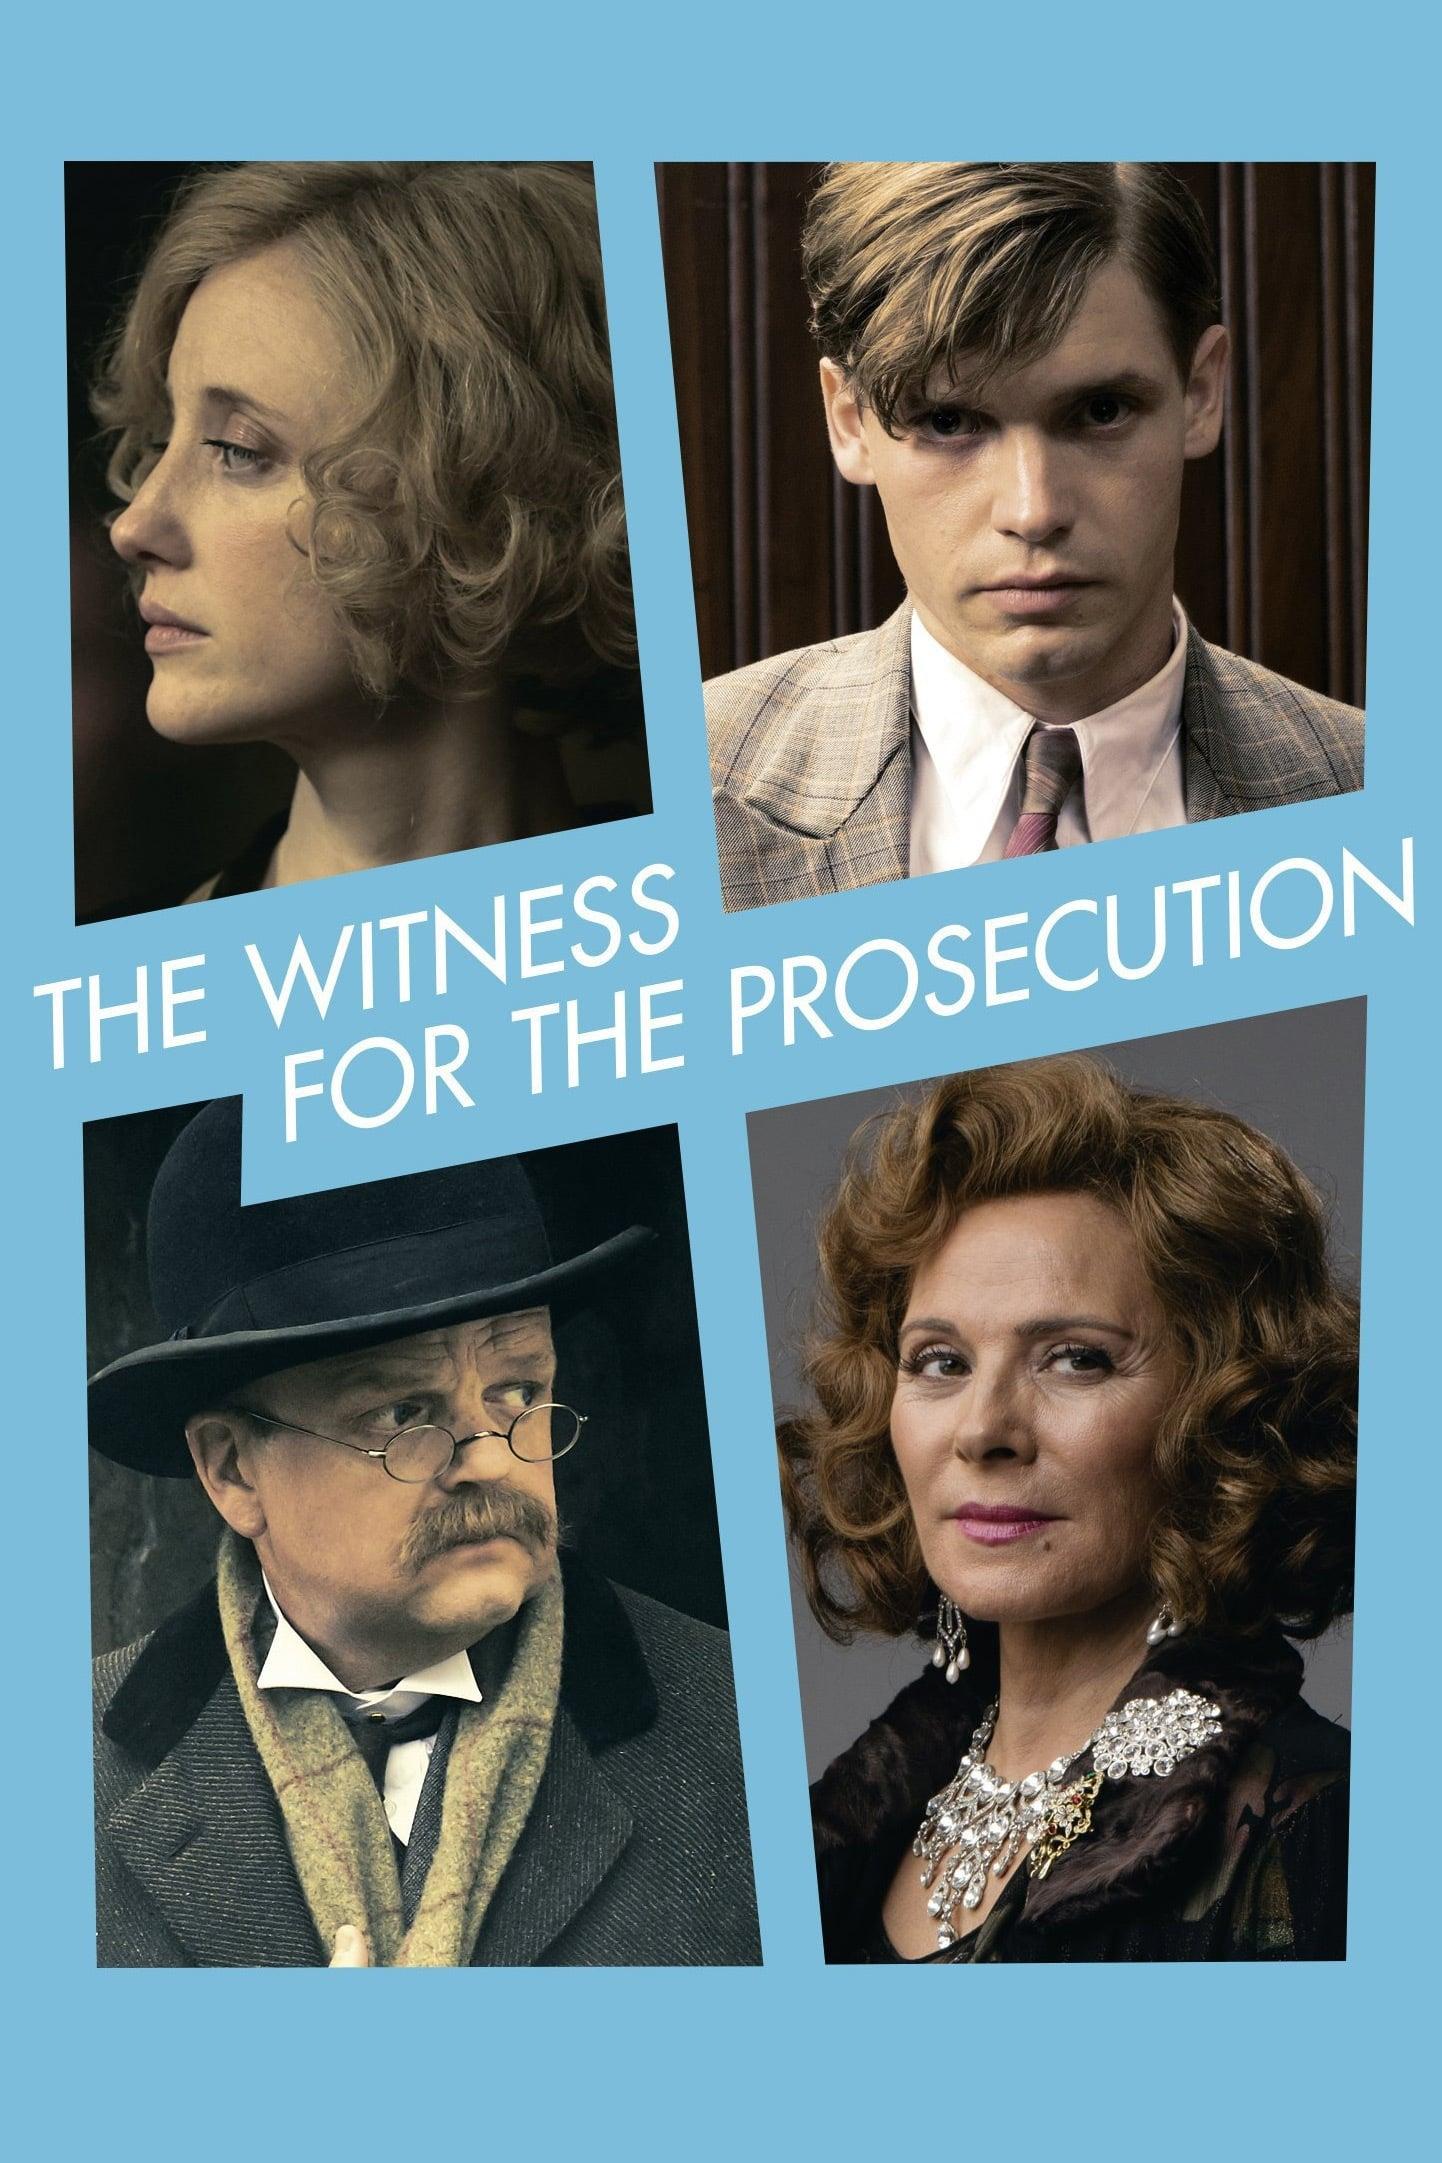 The Witness for the Prosecution poster